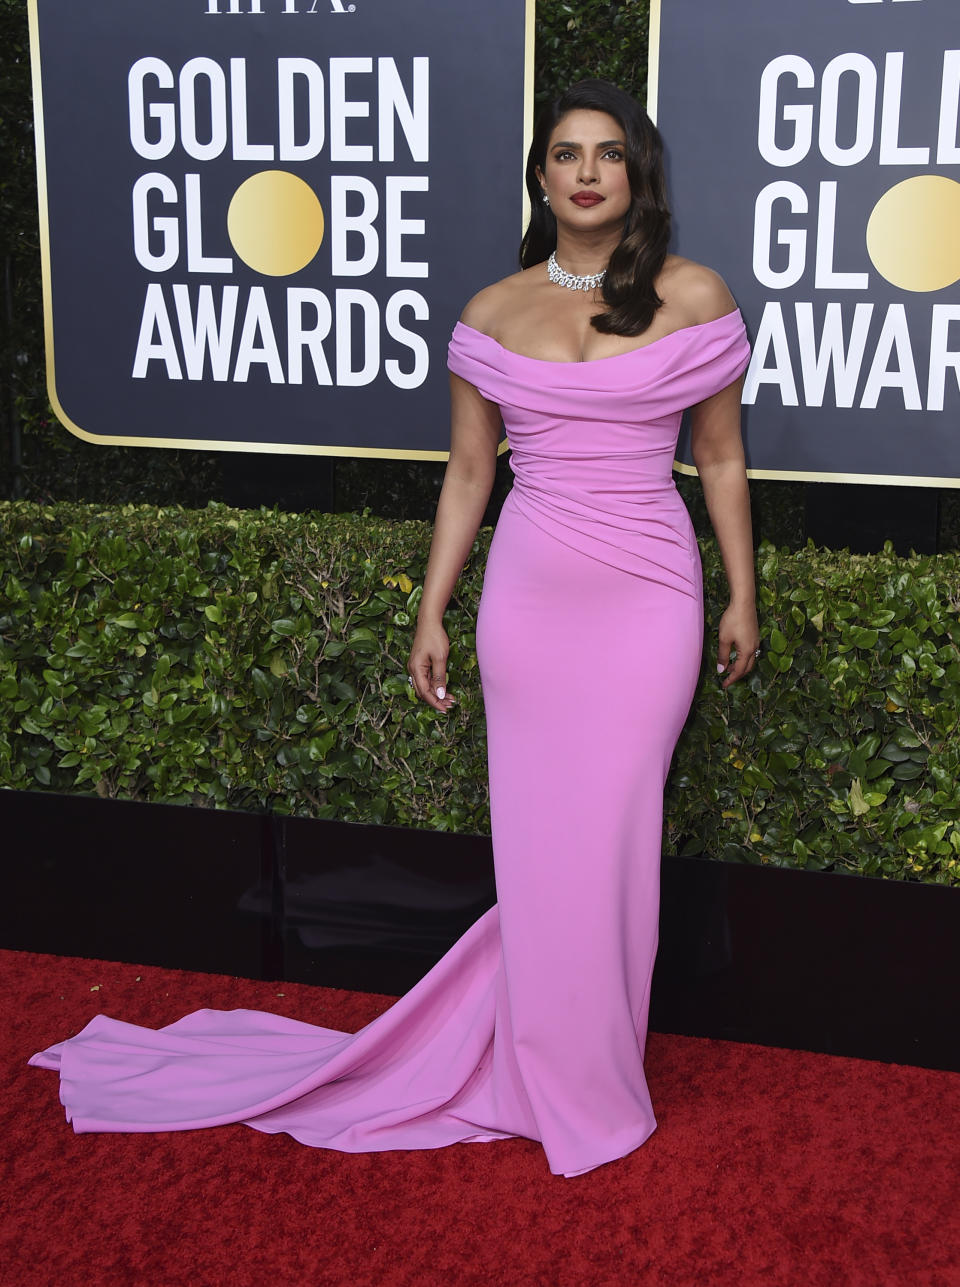 Priyanka Chopra arrives at the 77th annual Golden Globe Awards at the Beverly Hilton Hotel on Sunday, Jan. 5, 2020, in Beverly Hills, Calif. (Photo by Jordan Strauss/Invision/AP)